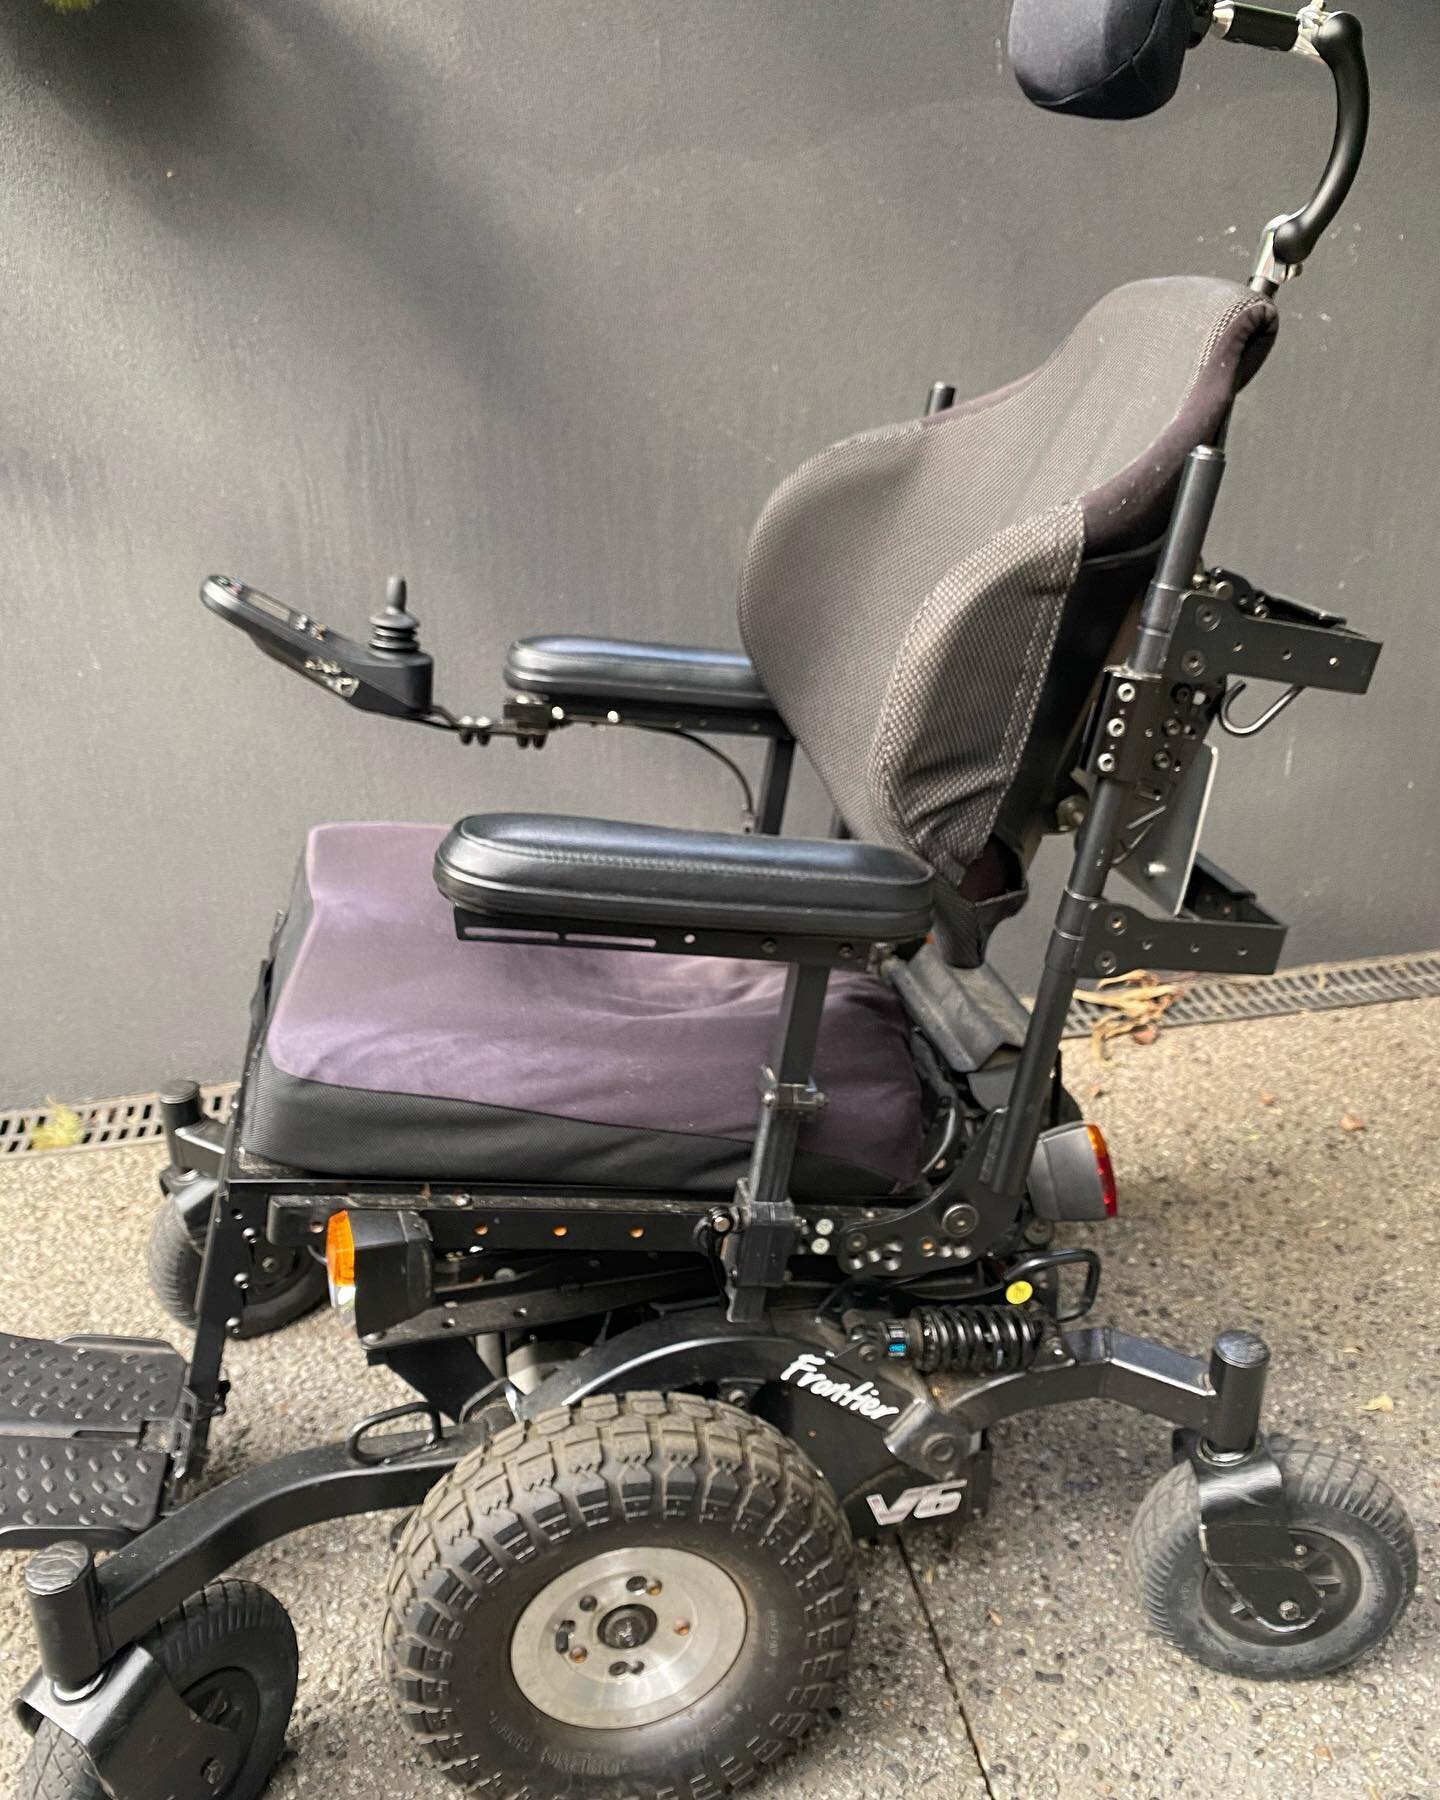 FREE TO SOMEBODY IN NEED 
I am giving away my old chariot after having upgraded this year, and would love to give someone in need this chair. If your in Melbourne and would like a power chair, send me a dm for more info. Must be able to pick up from 